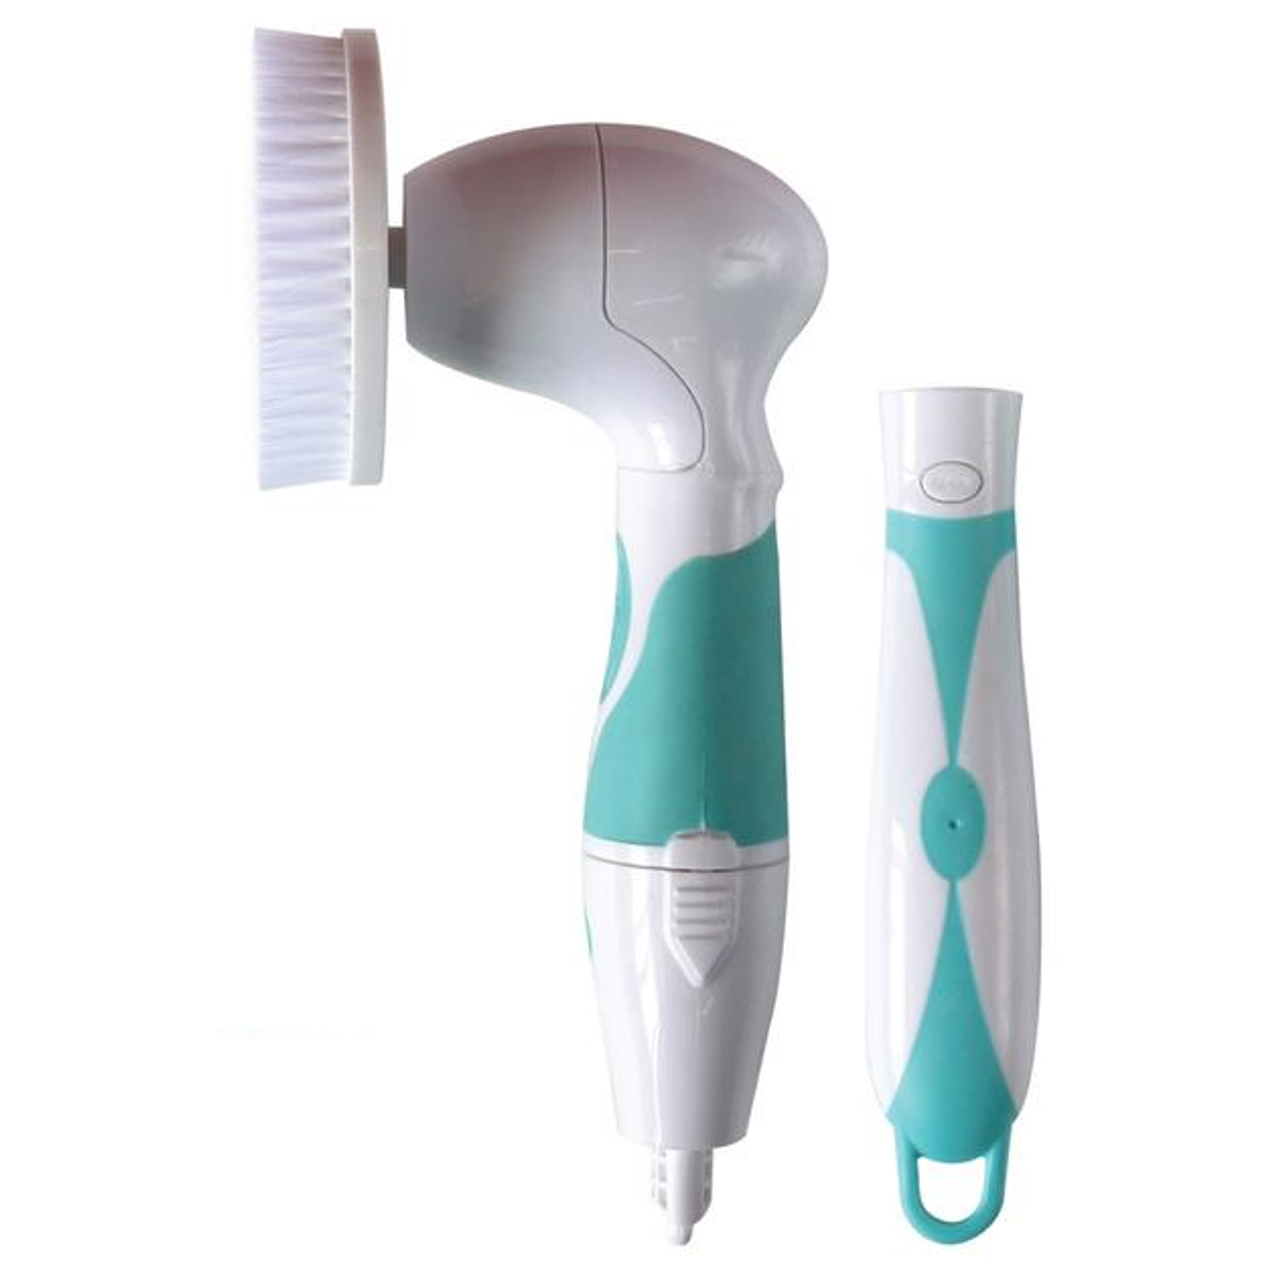 Advanced Facial & Body Cleansing Brush with Extended Handle by Pursonic® product image